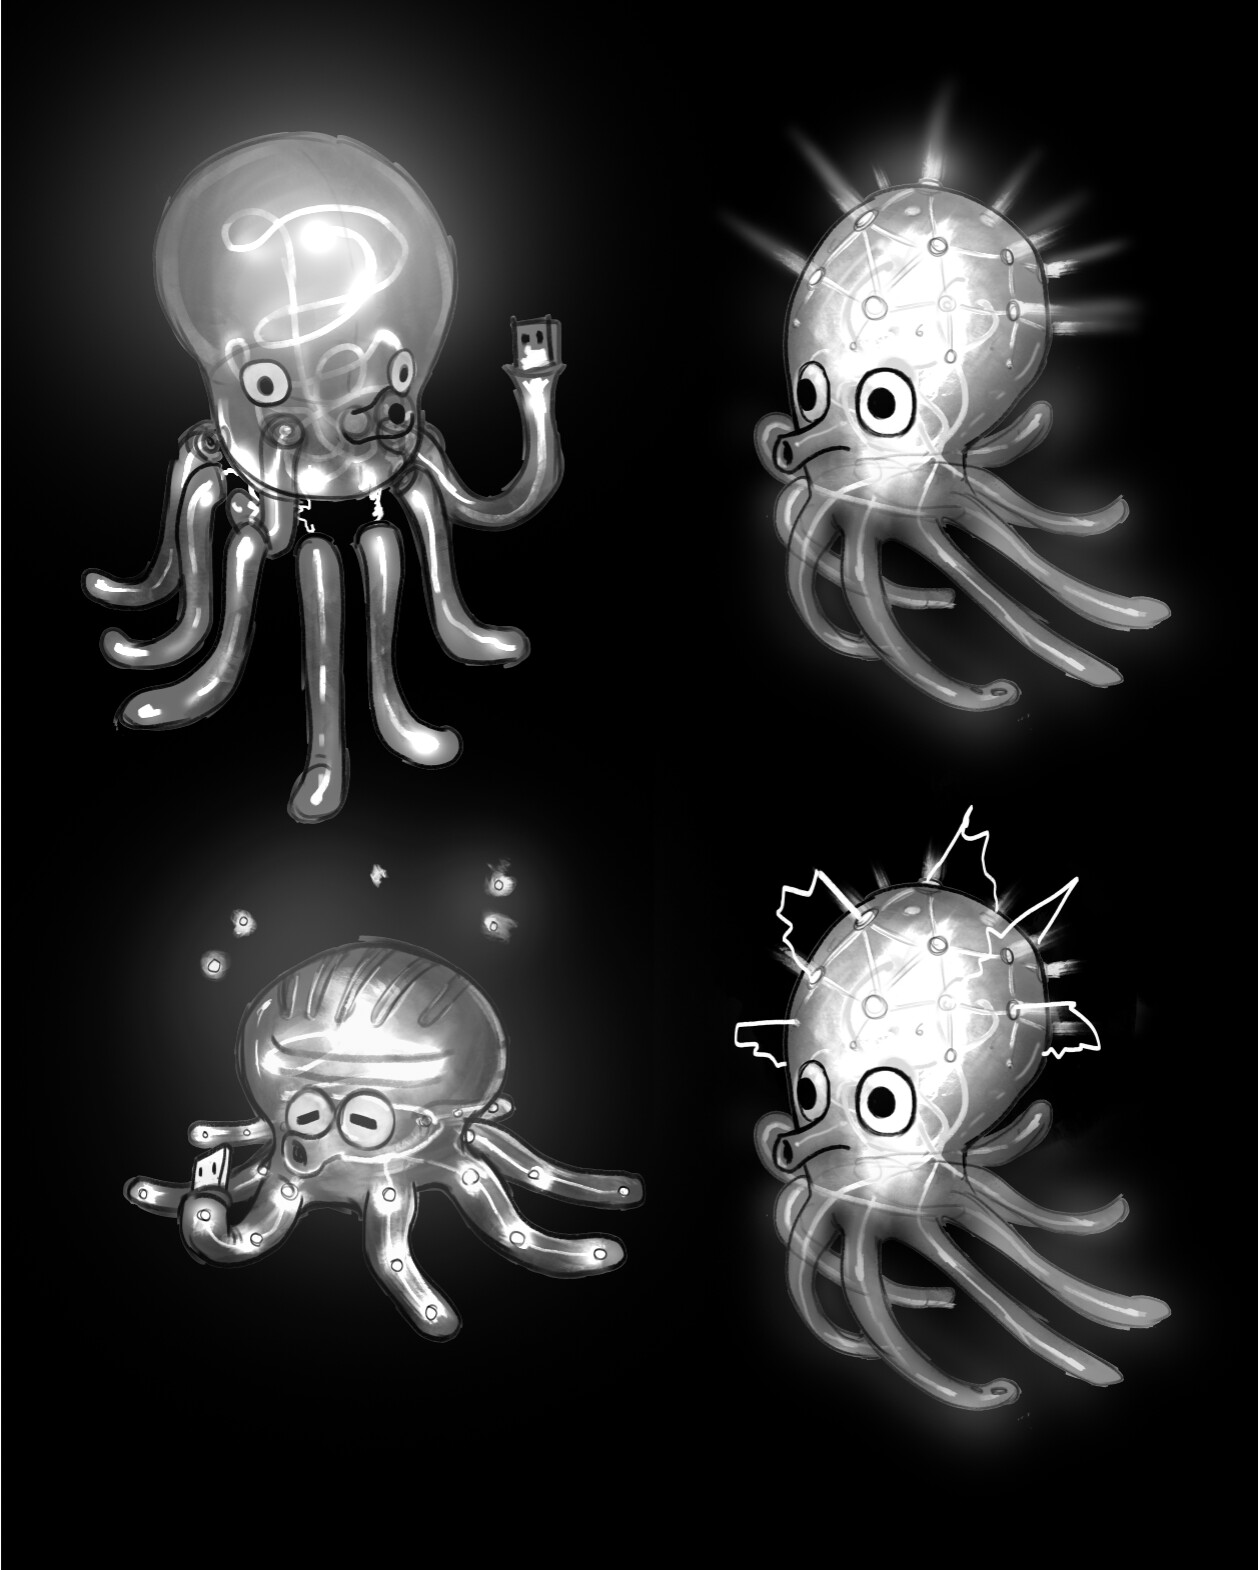 Early concepts for Pulpo